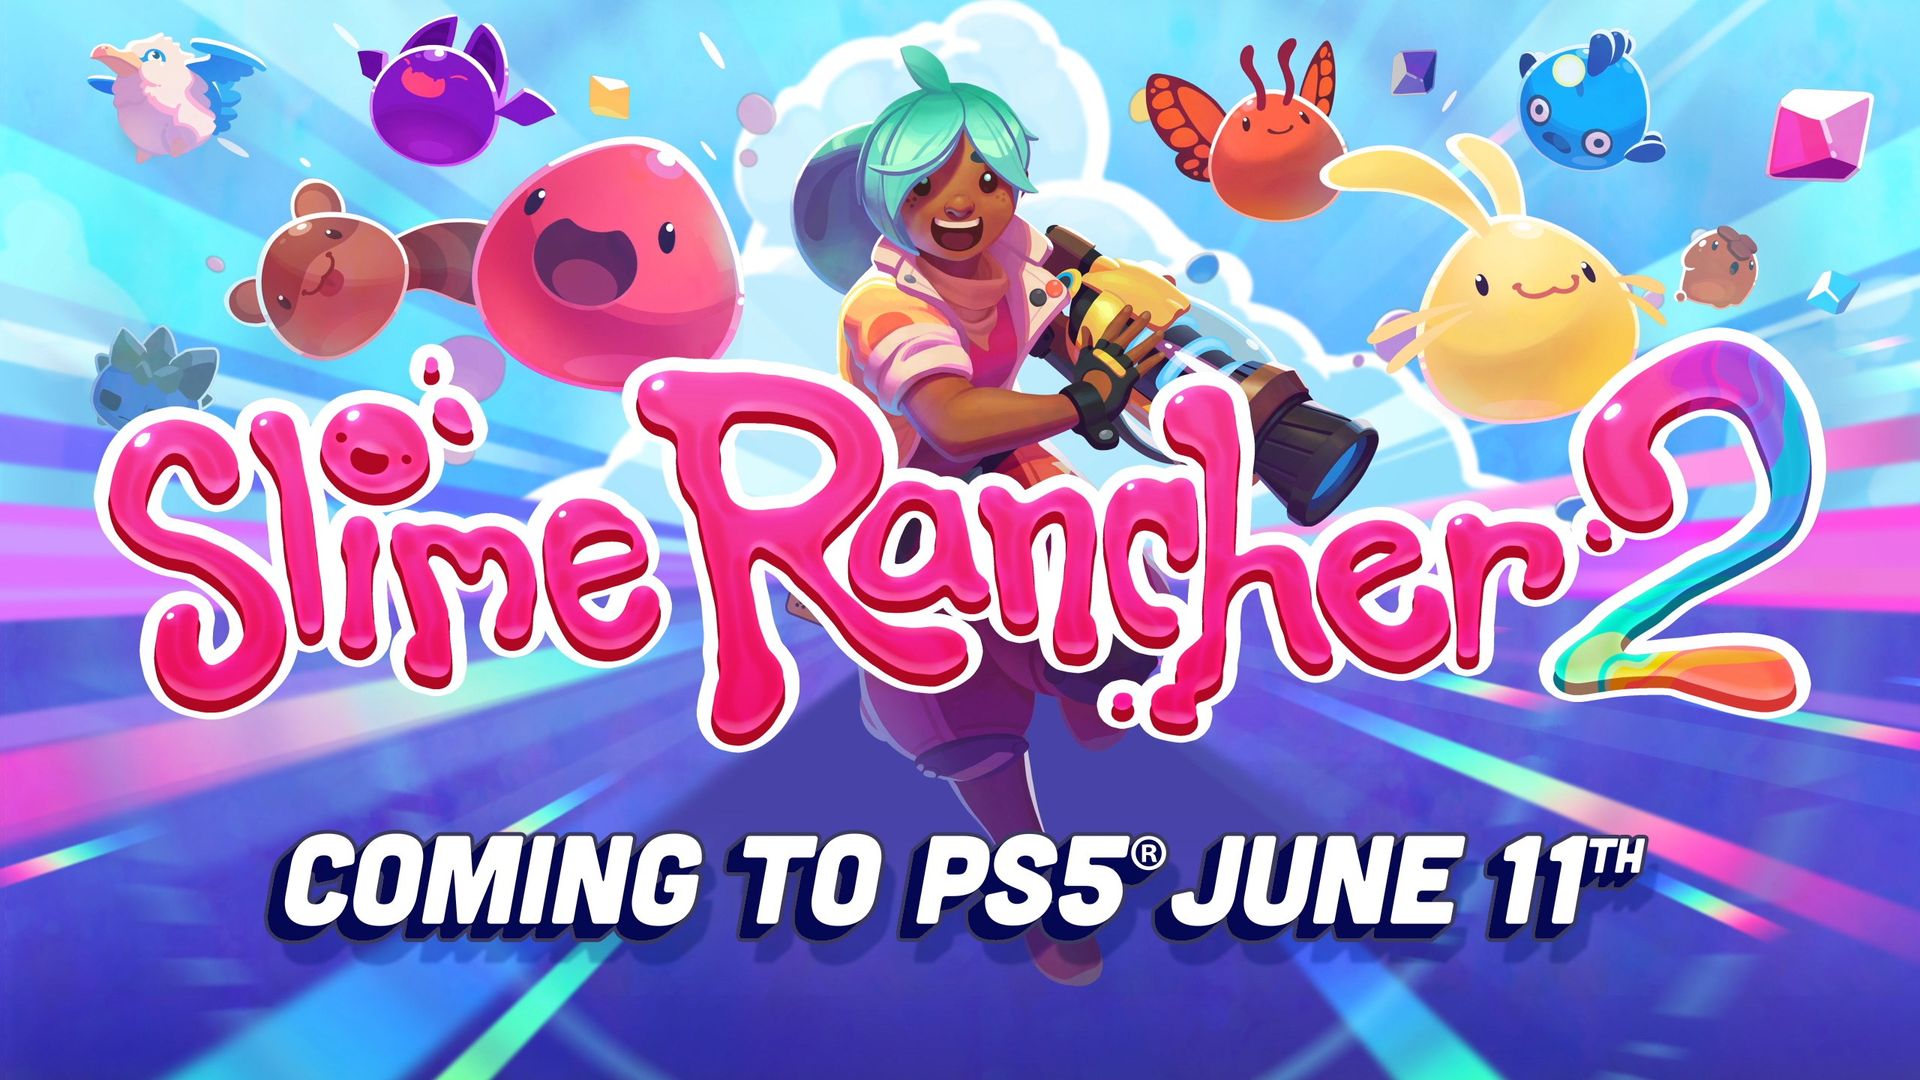 Slime Rancher 2 Early Entry coming to PS5 on June 11